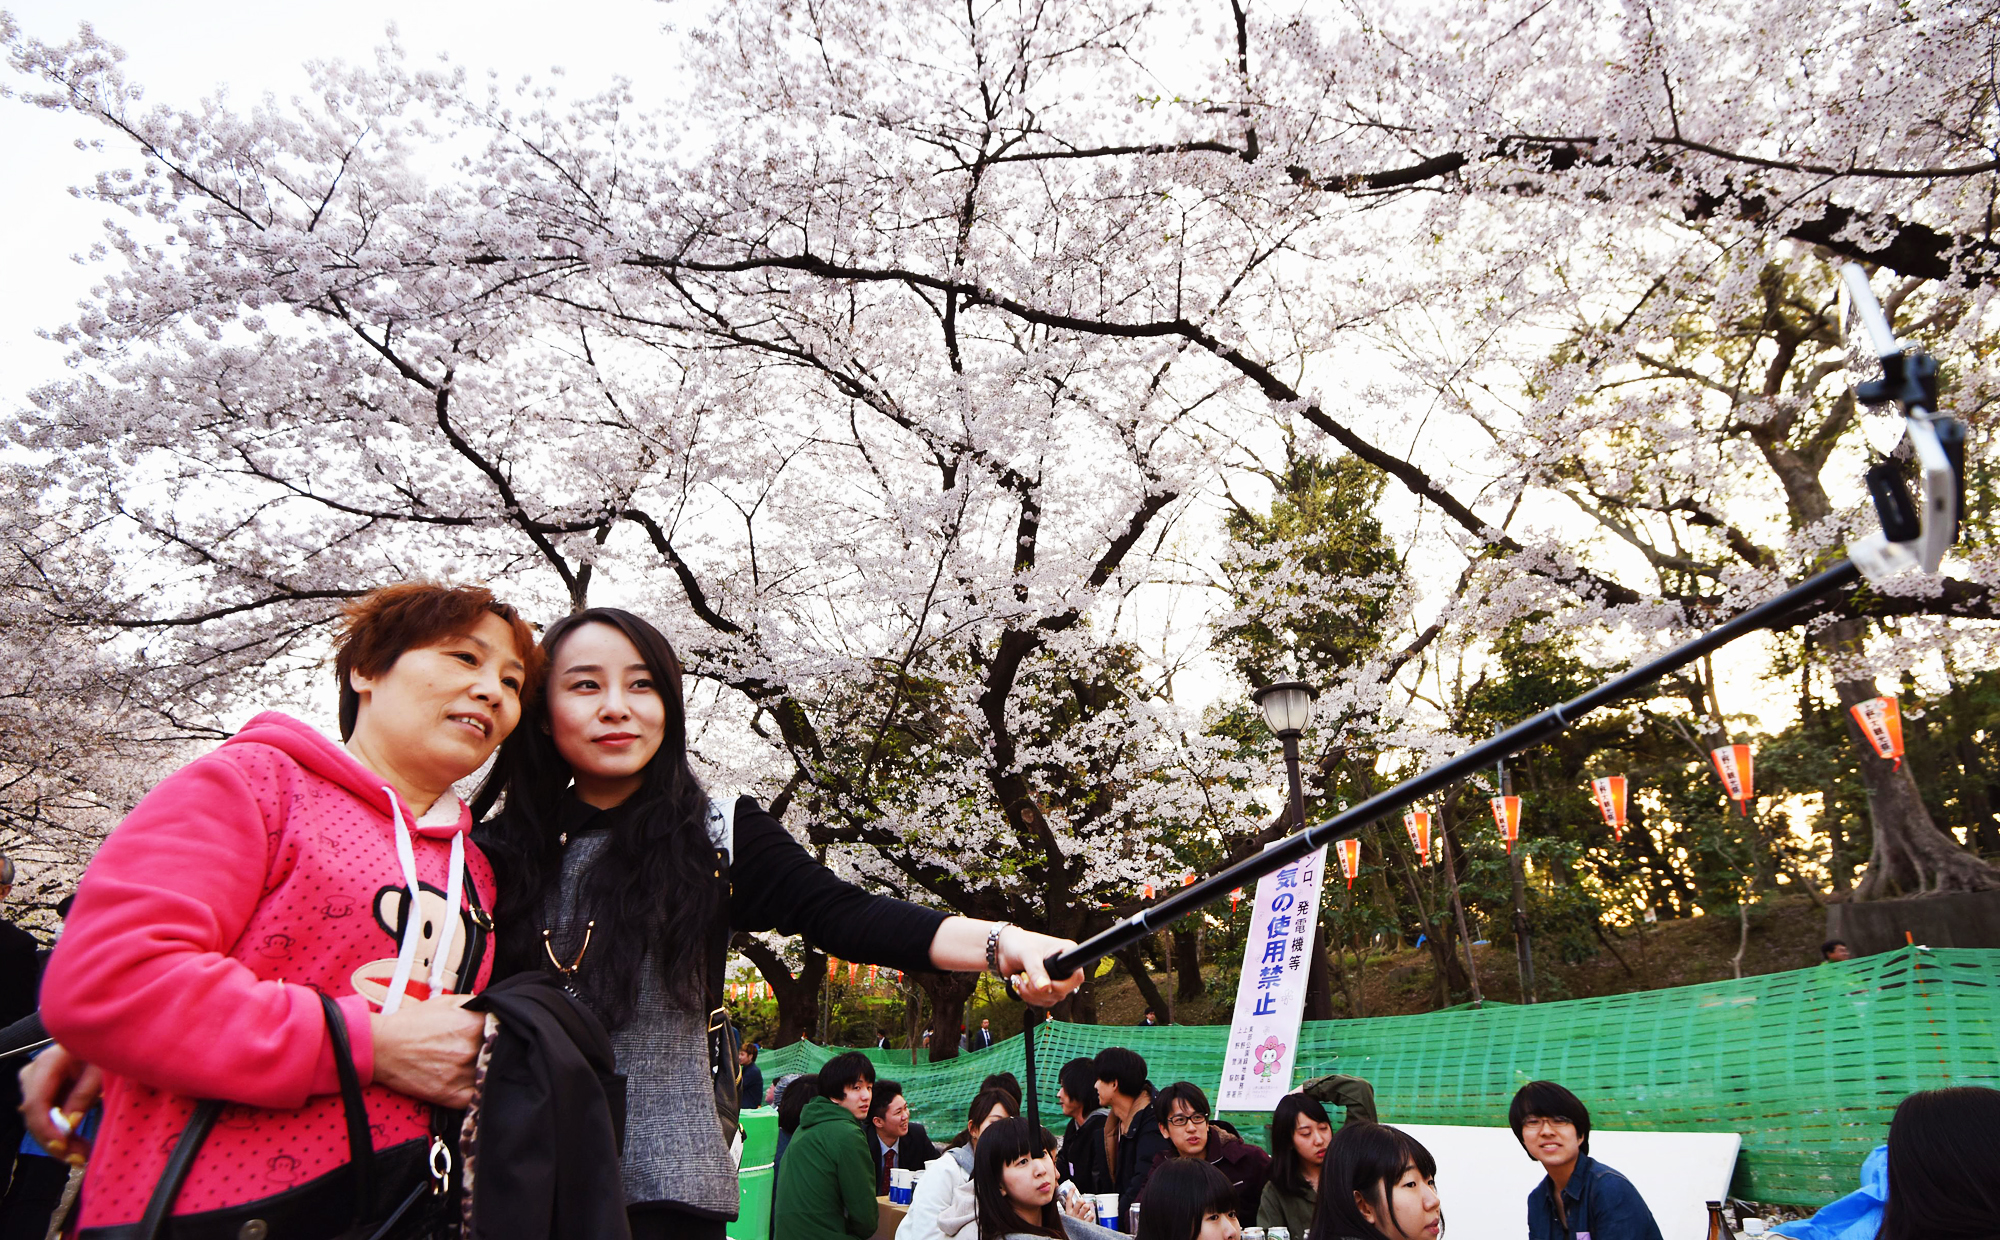 Japanese consulate officials in Shanghai issued a record number of visas in March to mainland travellers wishing to visit Japan to see cherry blossoms in bloom in April. Photo: Kyodo
